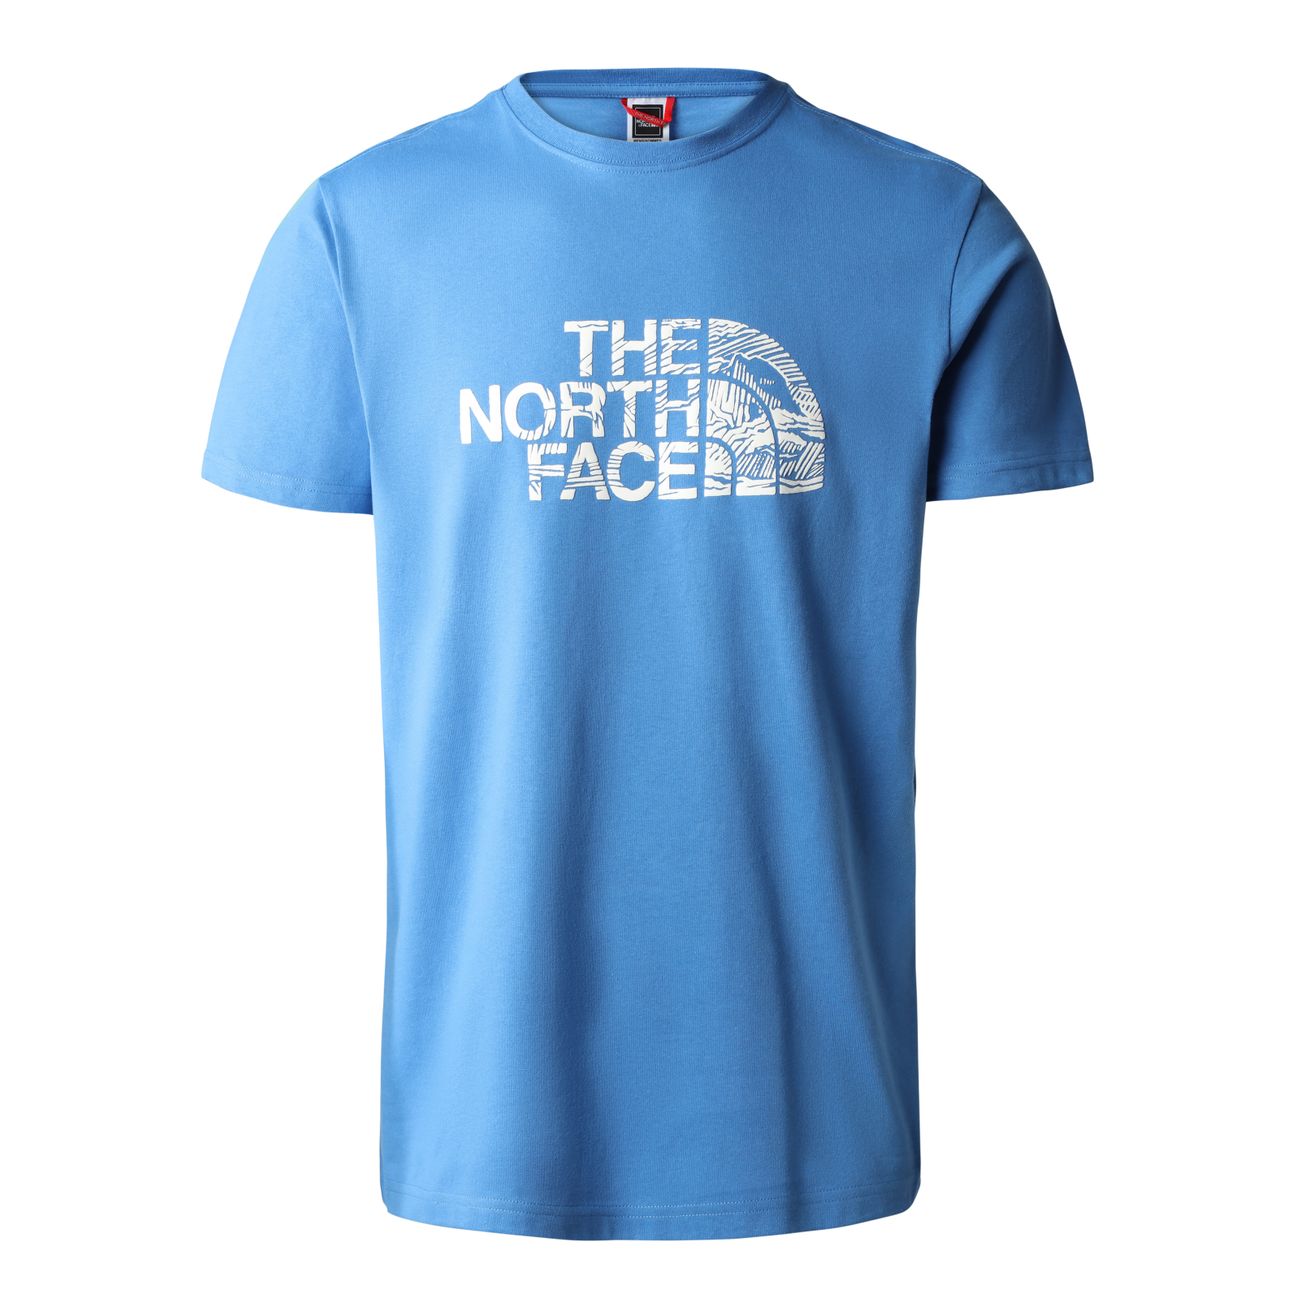 THE NORTH FACE M S/S WOODCUT DOME TEE Herren T-Shirt - The North Face - SAGATOO - 196249650745